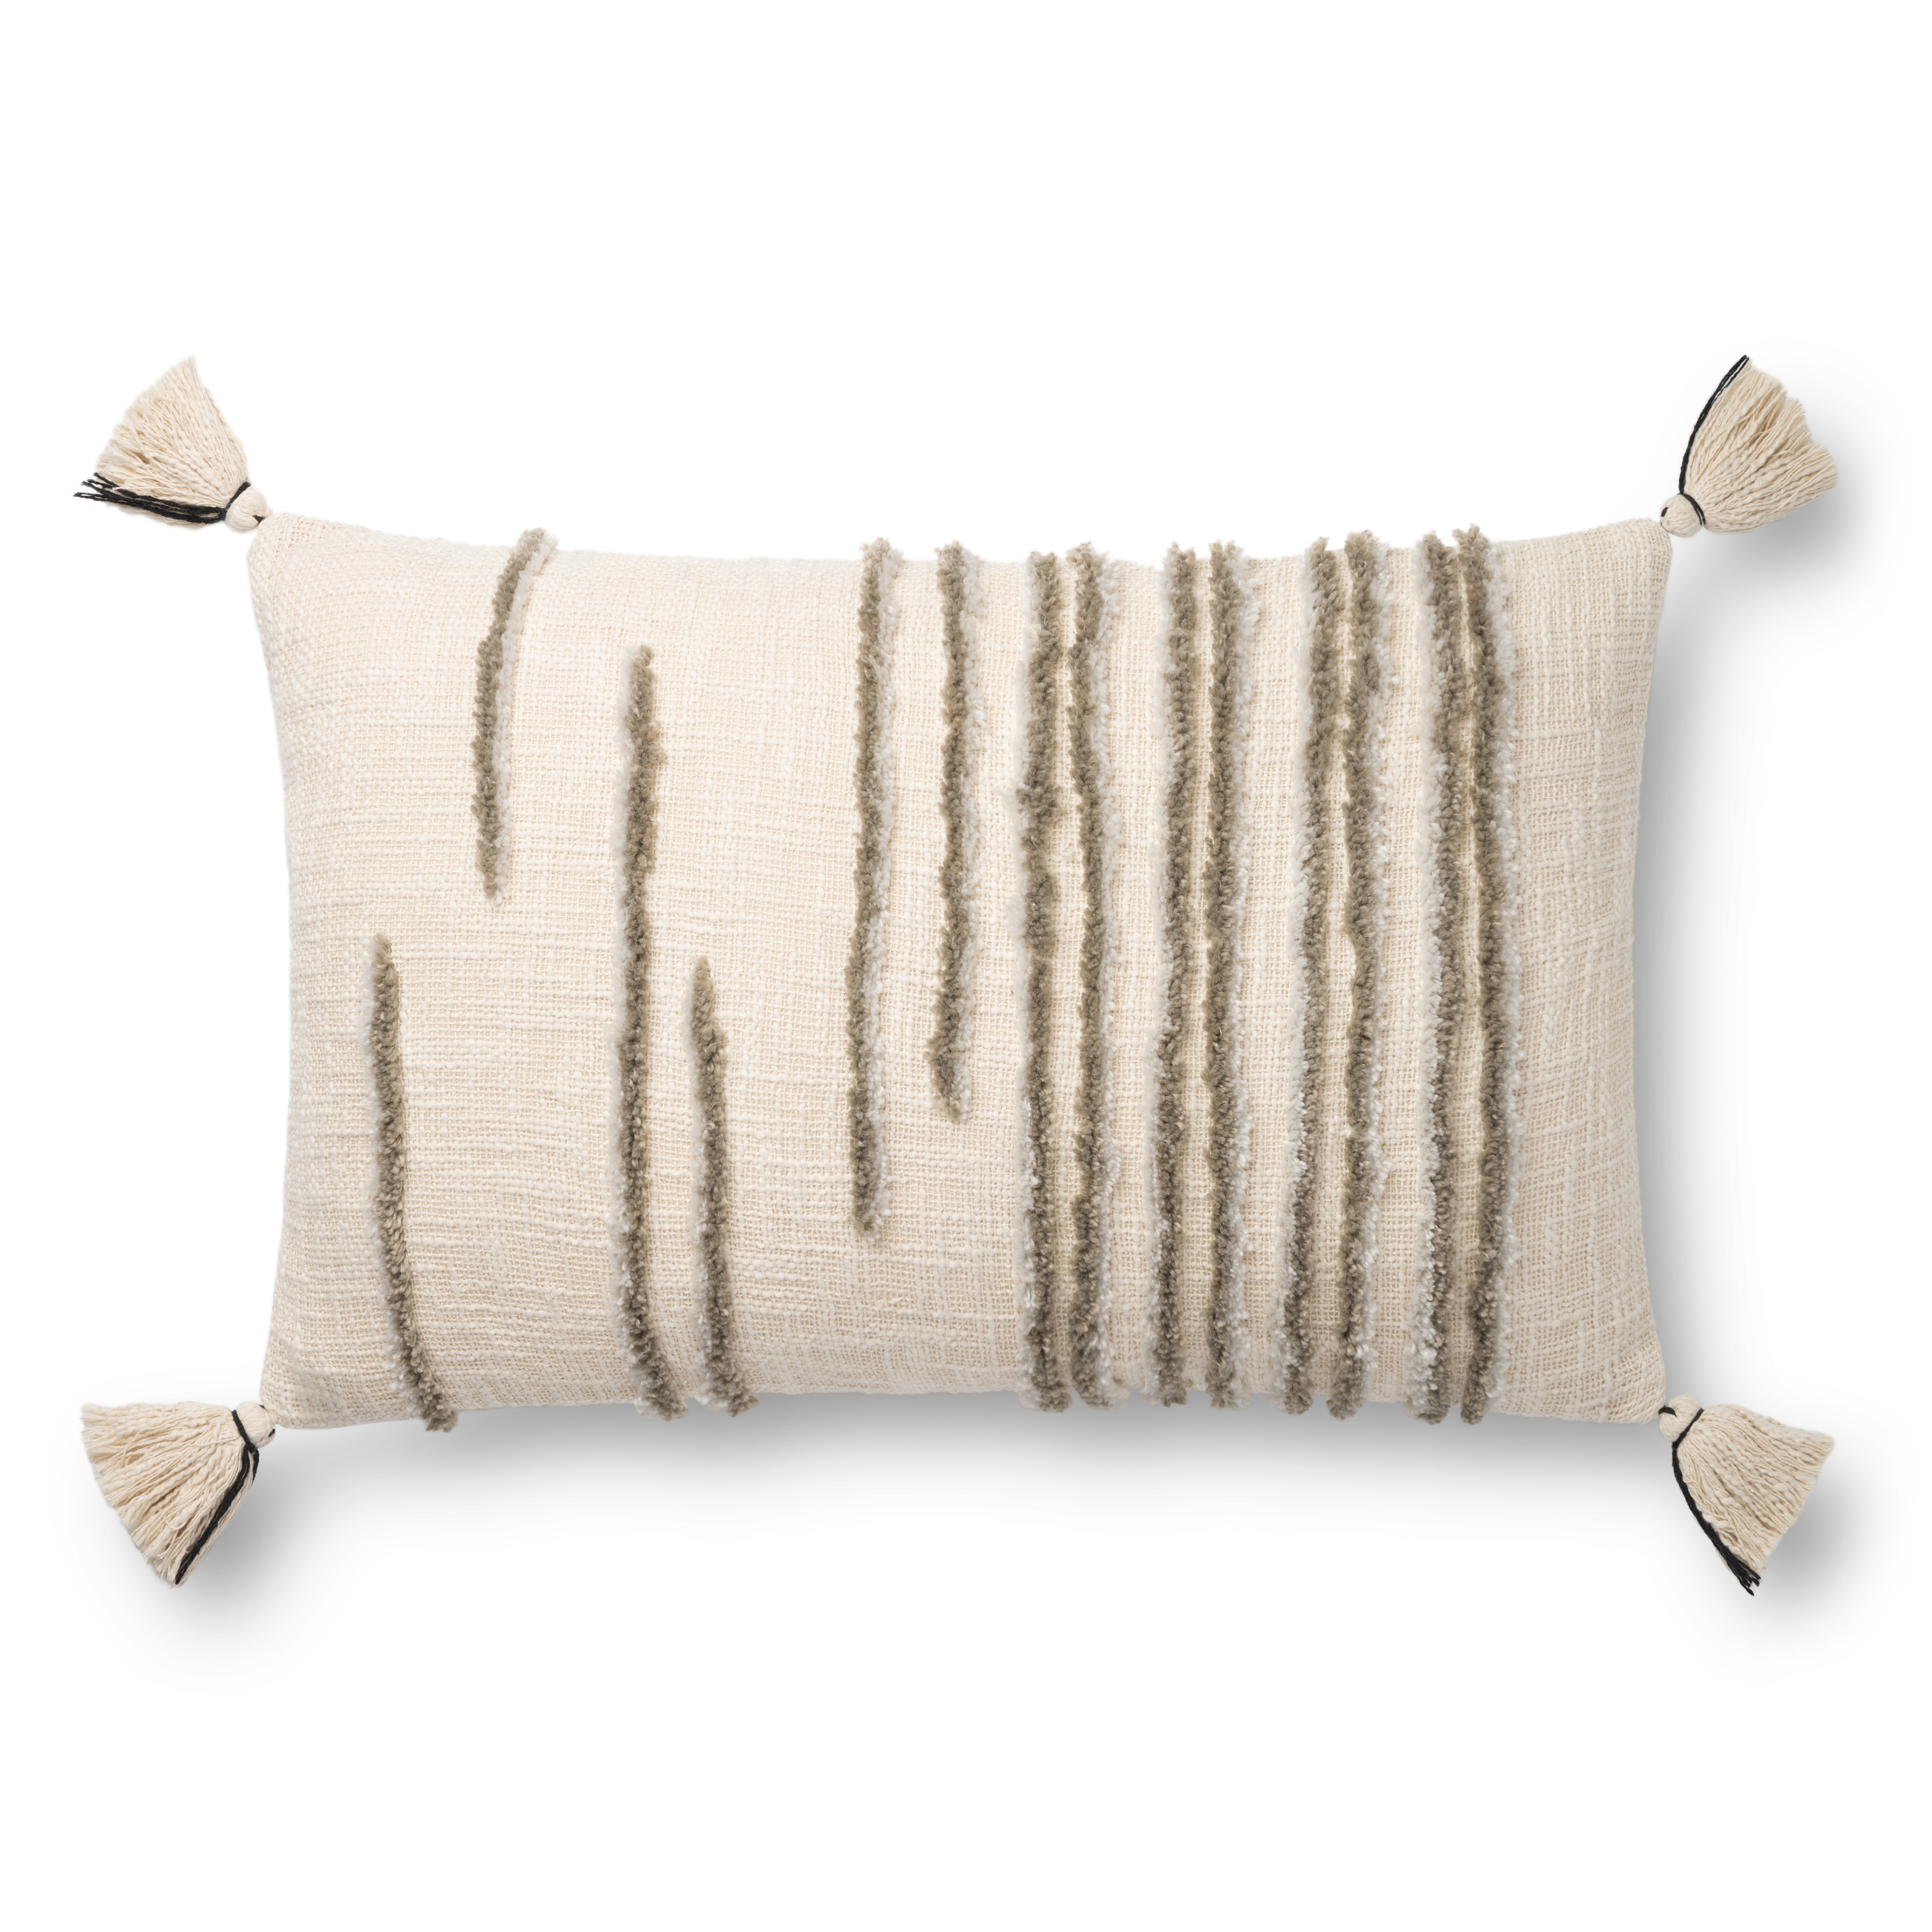 Loloi Pillows P0832 Natural / Stone 16" x 26" Cover Only - Image 0